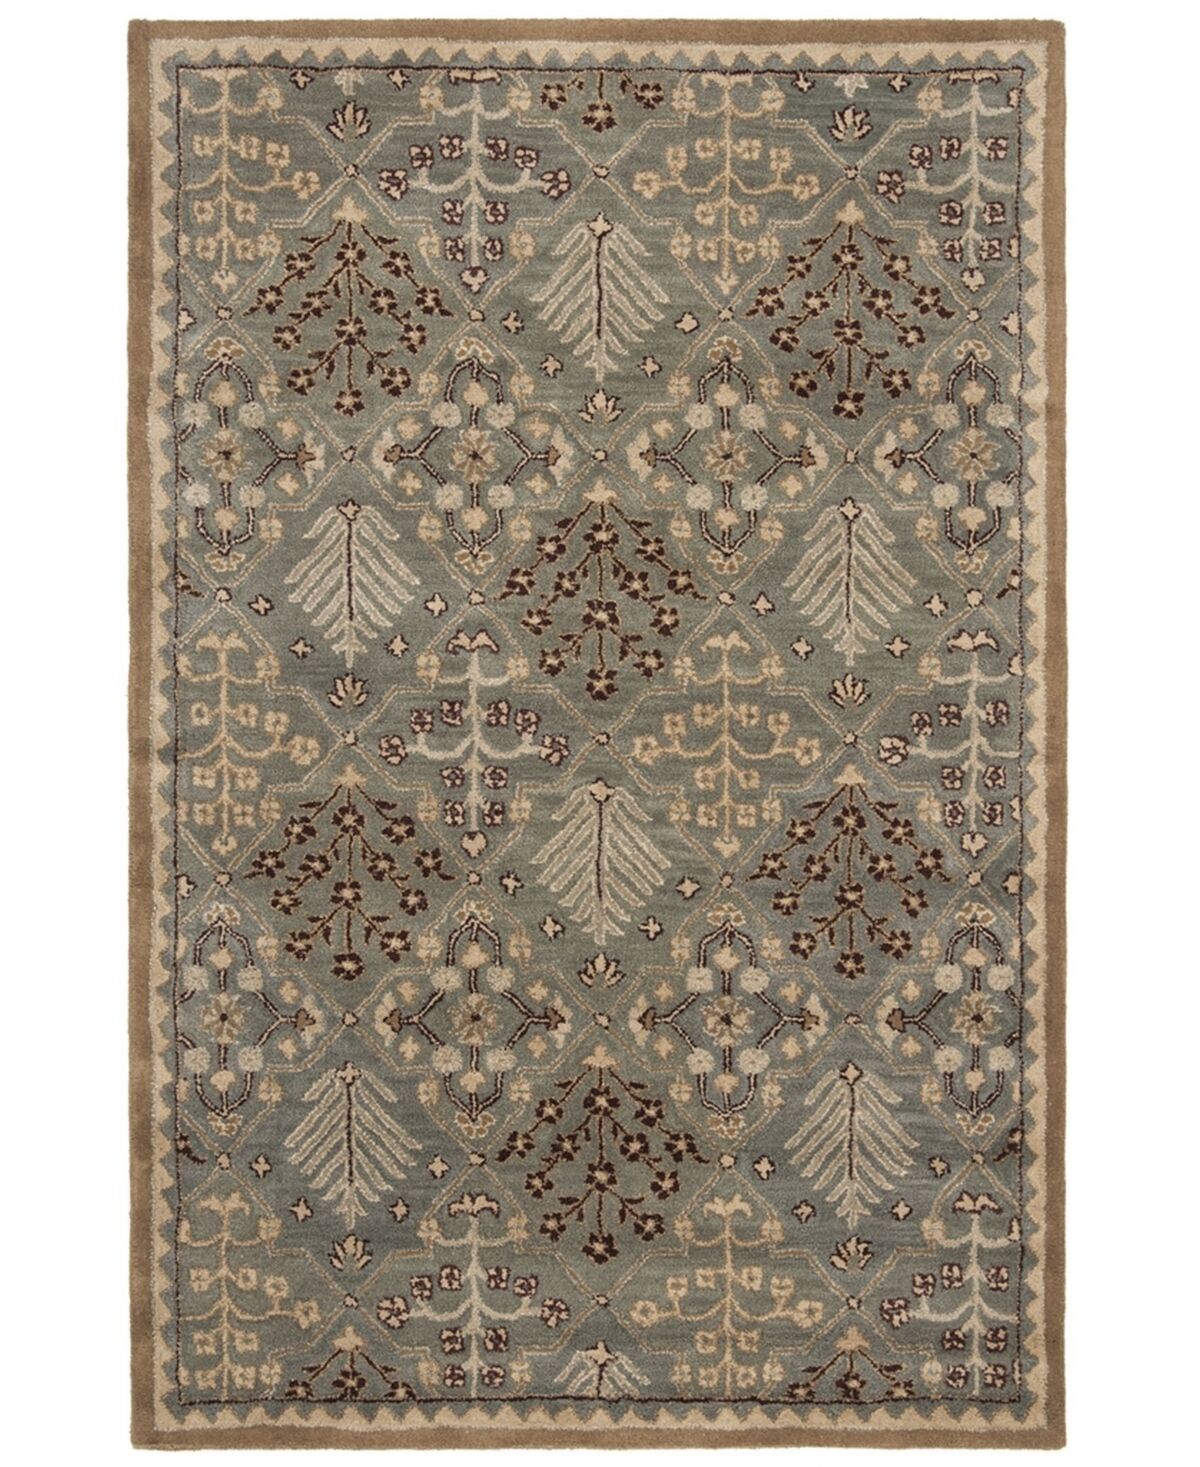 Safavieh Antiquity At613 Mist and Gold 5' x 8' Area Rug - Mist